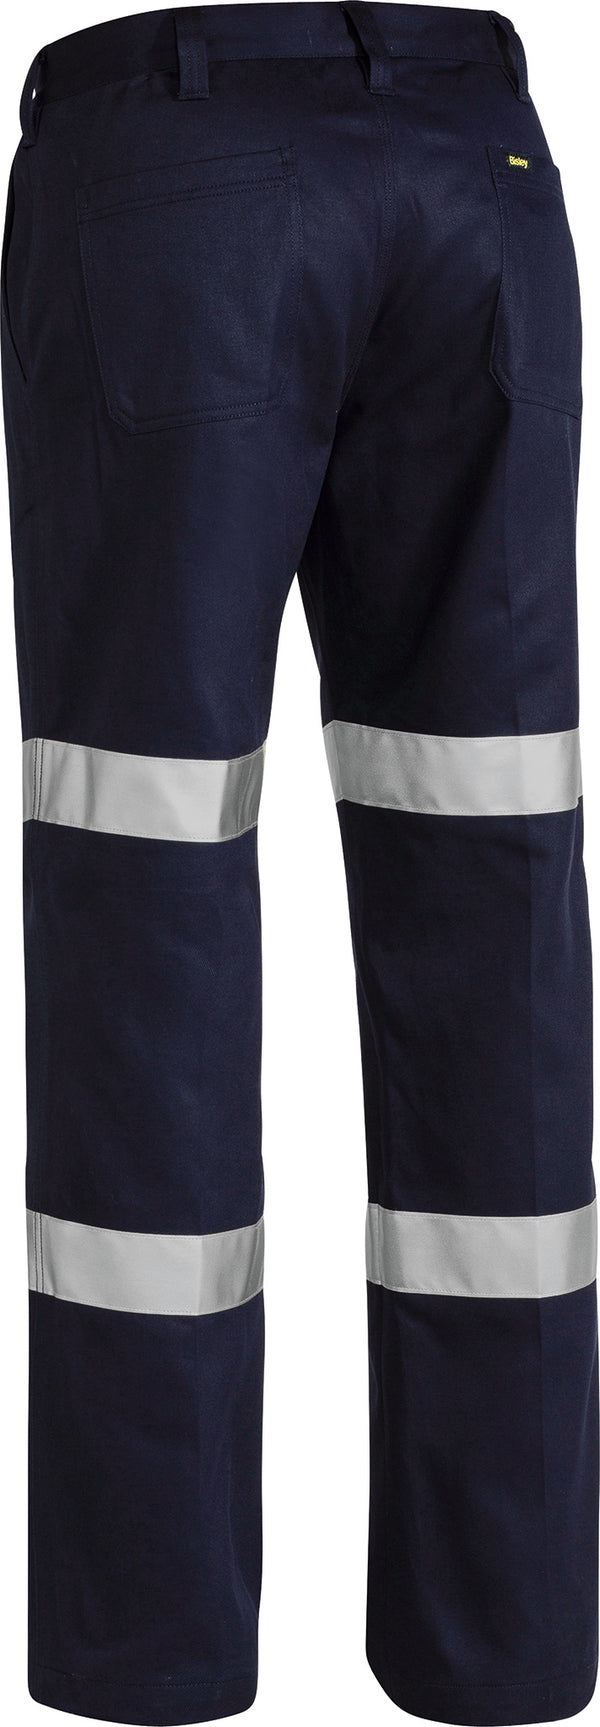 Taped Biomotion Cotton Drill Work Pant (Long)